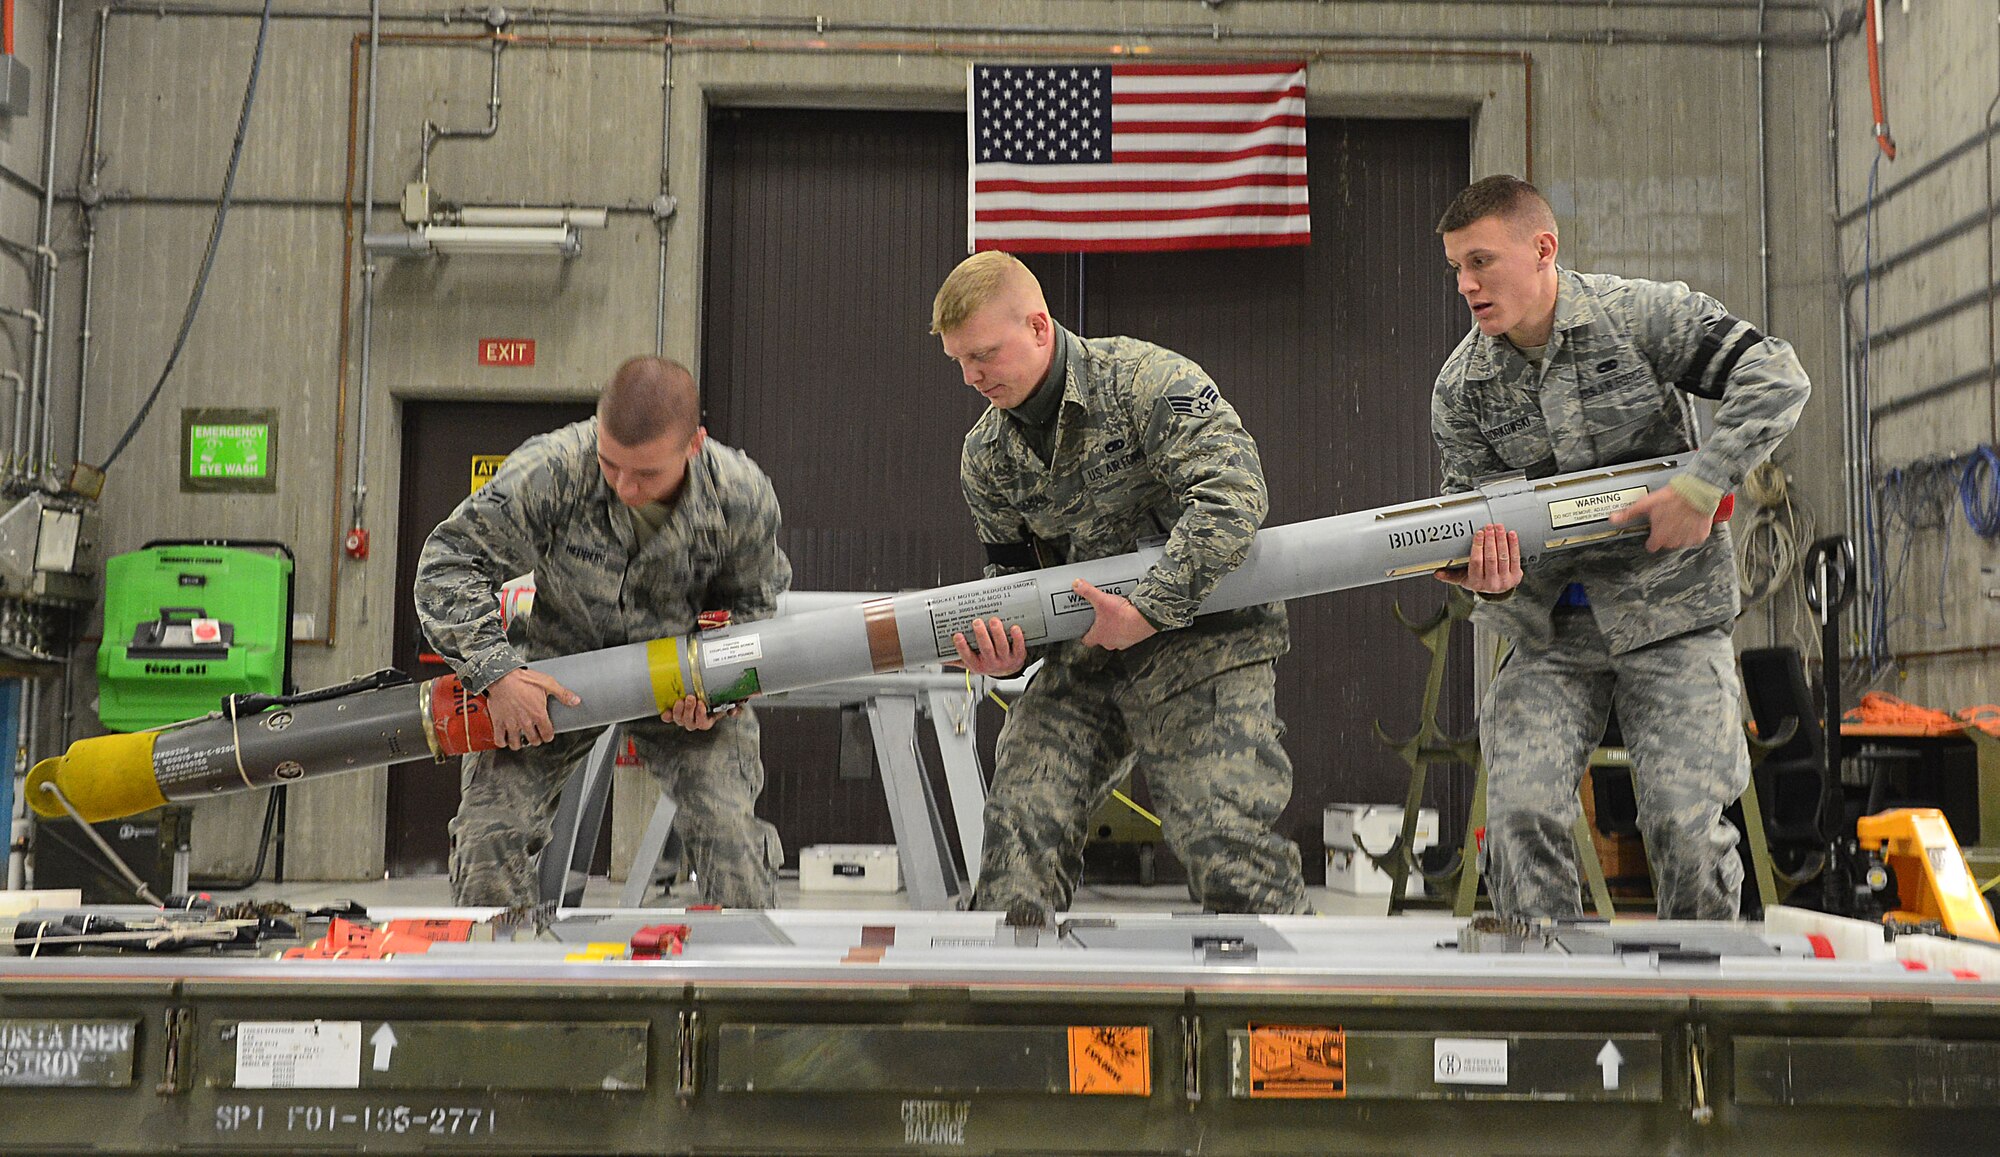 (From left) Airman 1st Class Cody Hedberg, Senior Airman Michael Bingaman and Airman 1st Class Phillip Borkowski, 31st Munitions Squadron precision guided munitions crew members, picks up an AIM-9/M missile to inspect, Feb. 26, 2013 at Aviano Air Base, Italy. Under the 31st MUNS, there are six different flights that provide armament, production, materiel, weapons, systems and programs for the 510th and 555th Fighter squadrons and the 31st Security Forces Squadron. (U.S. Air Force photo/Airman 1st Class Matthew Lotz)